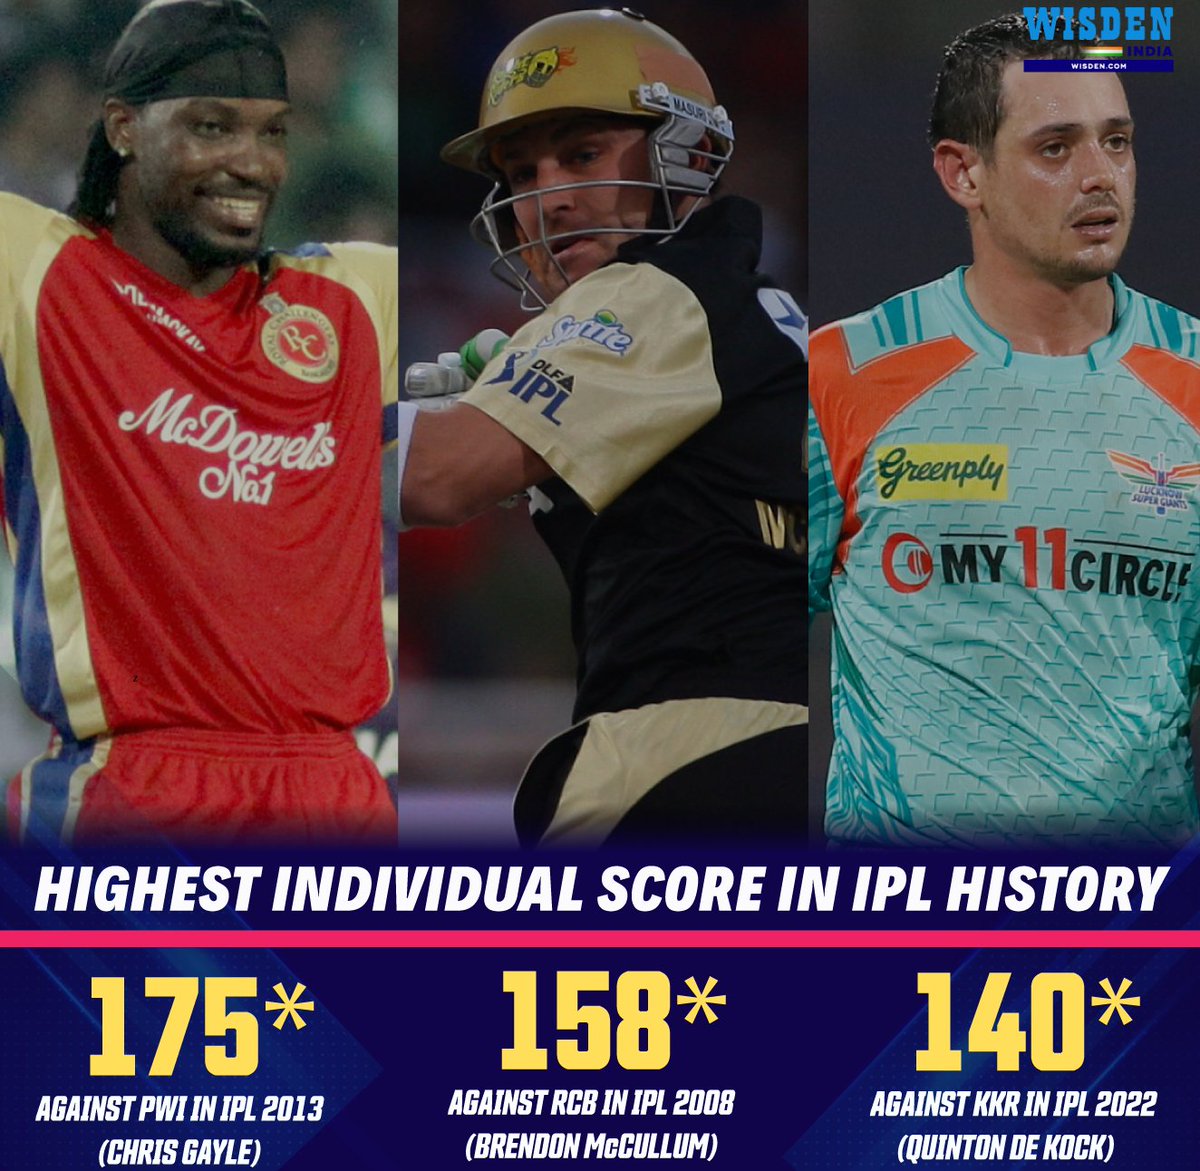 Chris Gayle ⏩ Brendon McCullum ⏩ Quinton de Kock

Batters with the highest individual score in IPL history.

#ChrisGayle #BrendonMcCullum #QuintondeKock #IPL2024 #Cricket